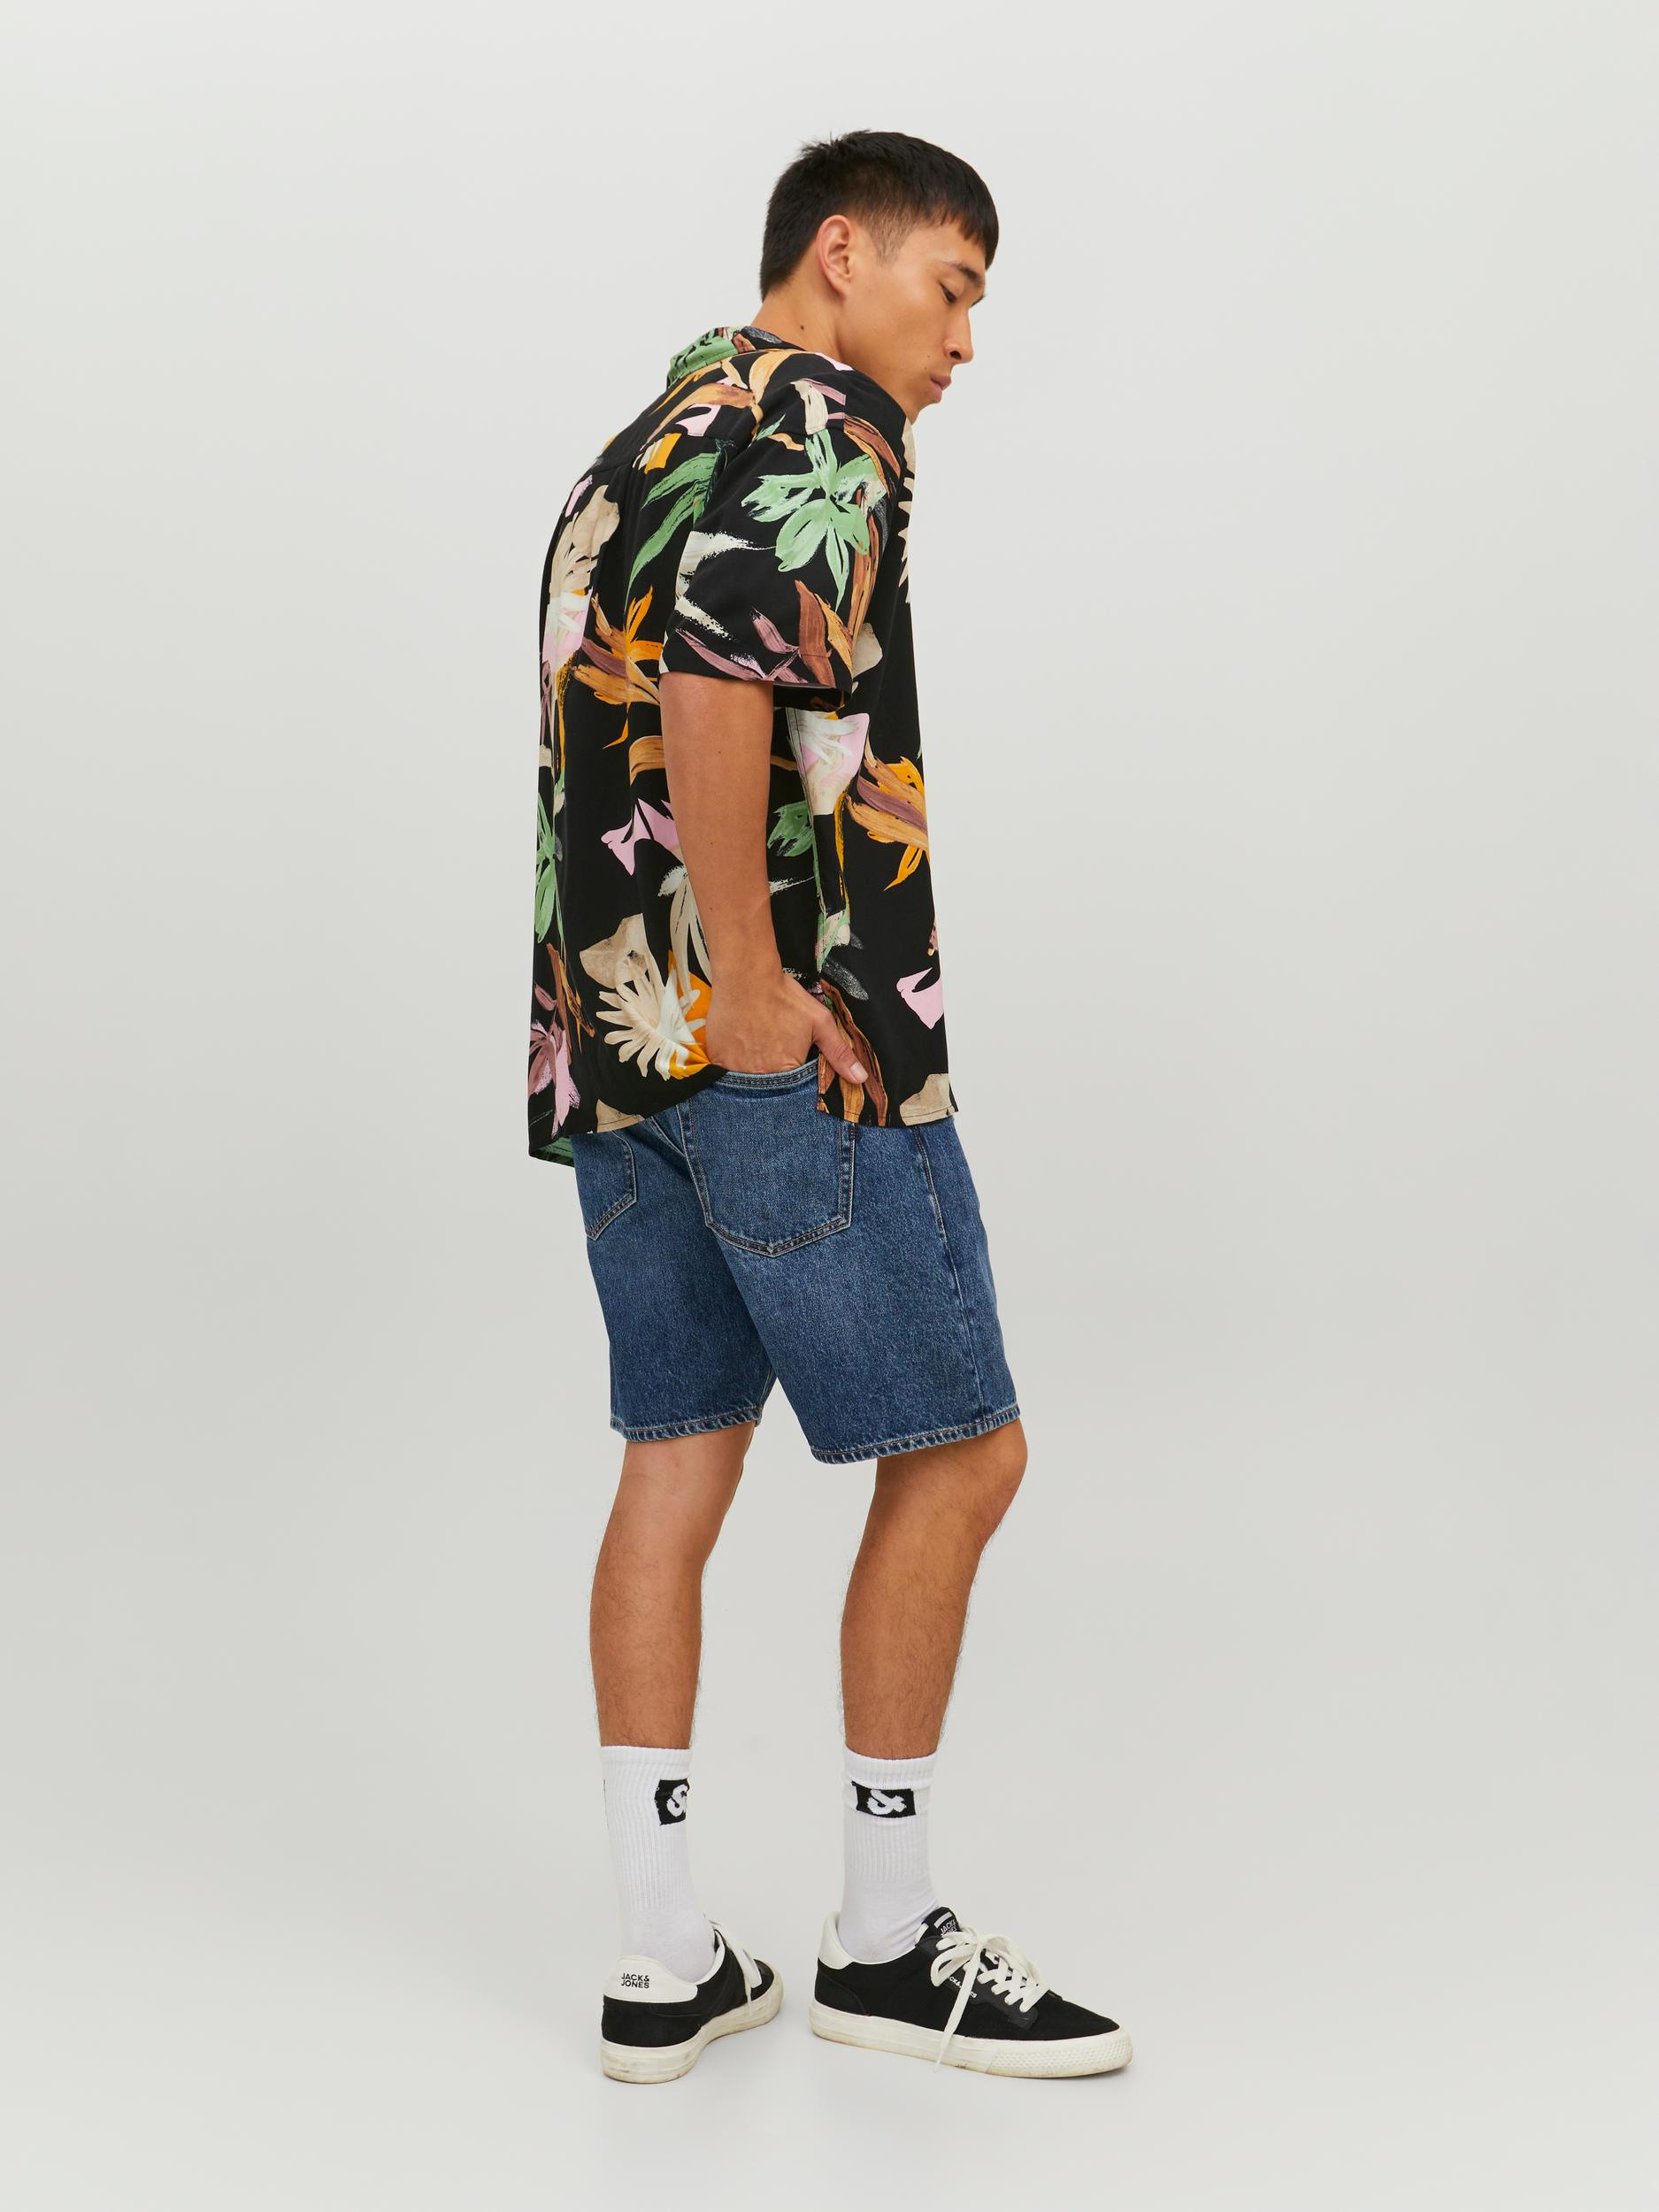 Jack & Jones - Relaxed fit shirt with floral print, Black, large image number 3